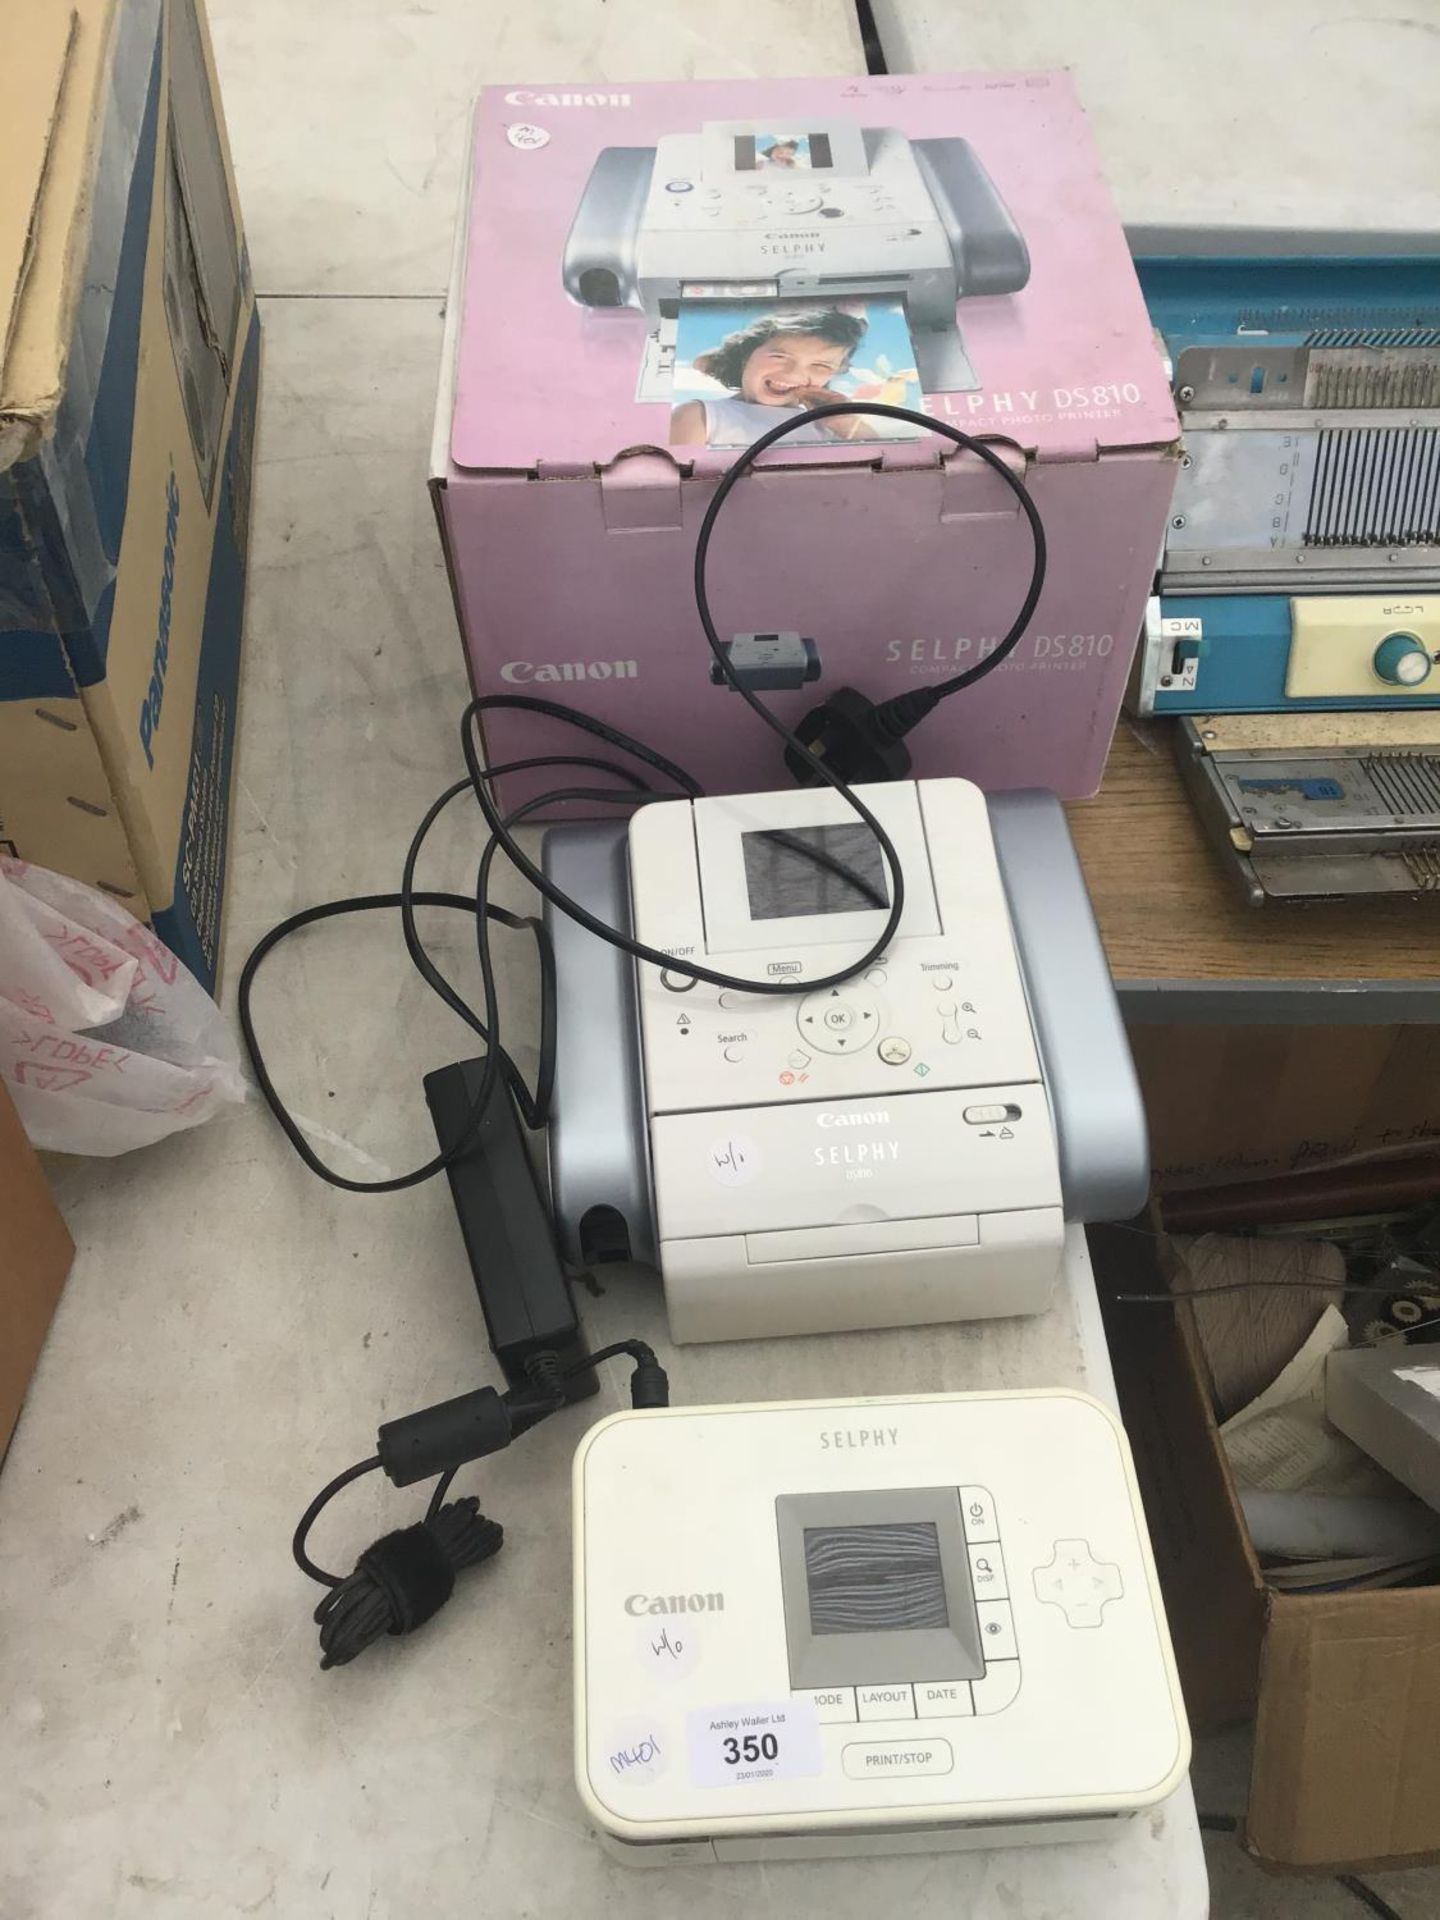 A CANON SELPHY DS810 PRINTER IN WORKING ORDER